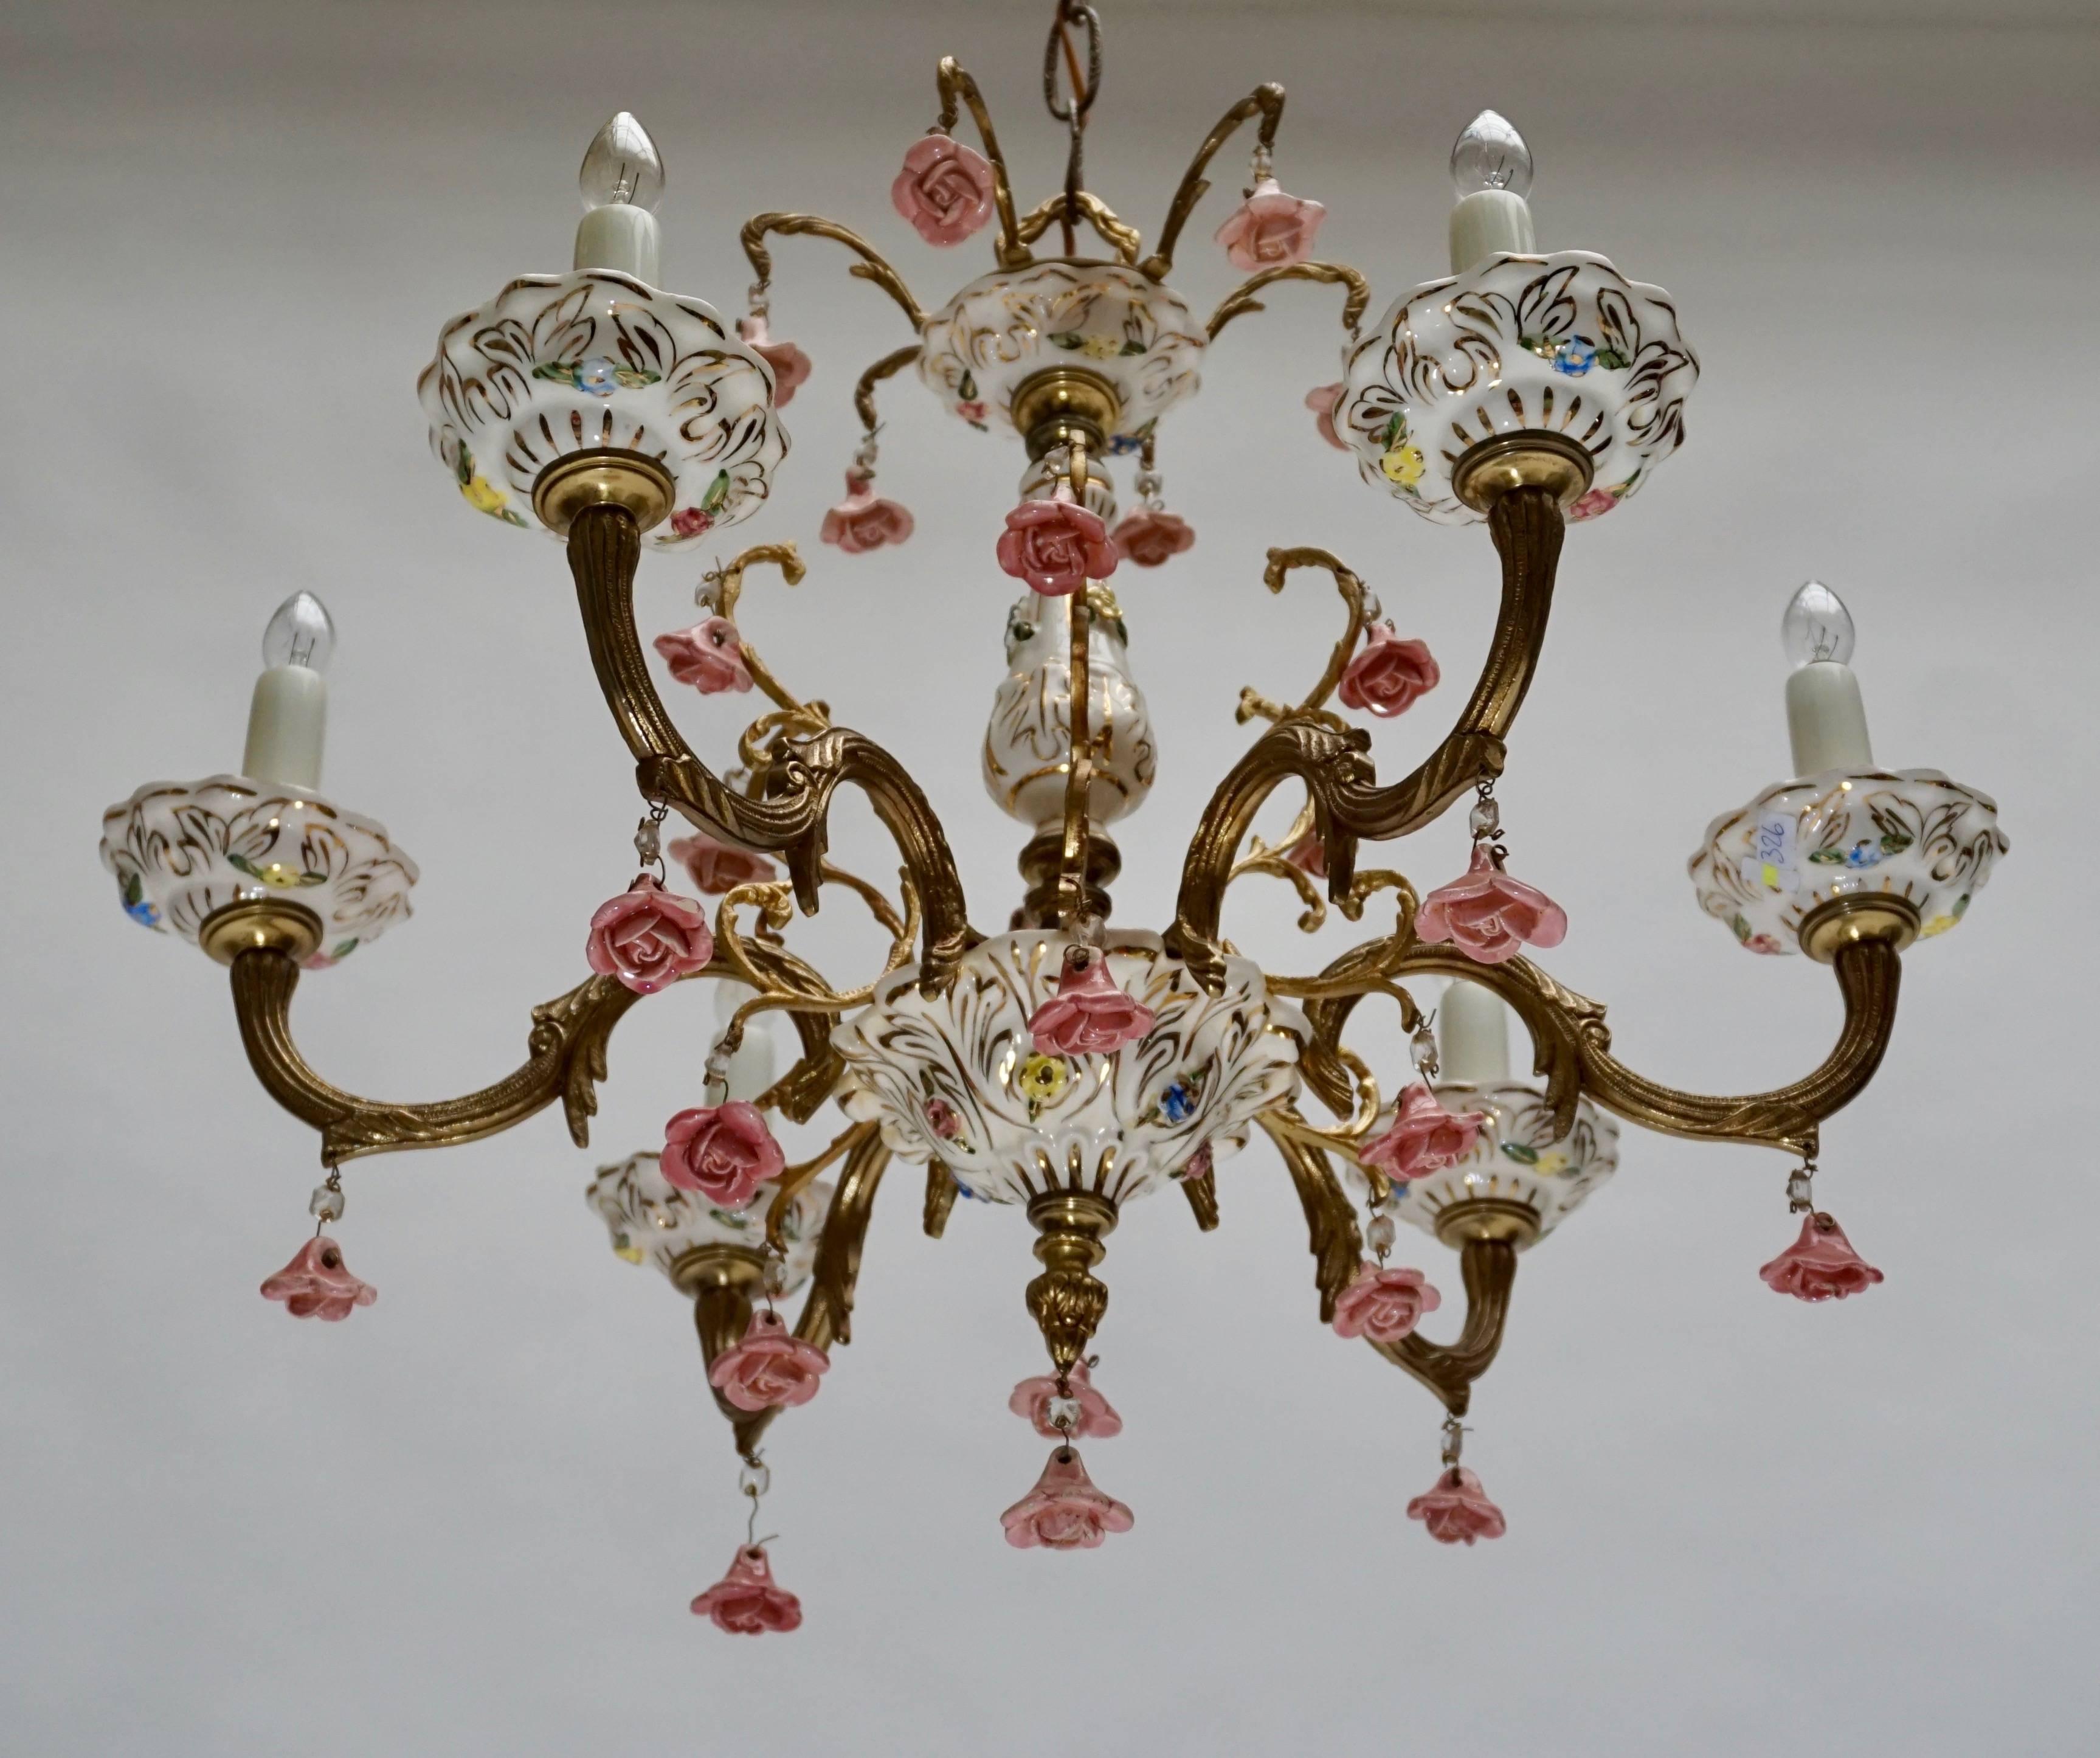 Wonderful six-light handcrafted gilt metal with porcelain flowers chandeliers.
Six E14 bulbs.
Measures: 
Diameter 57 cm.
Height fixture 45 cm.
Total height with the chain 90 cm.